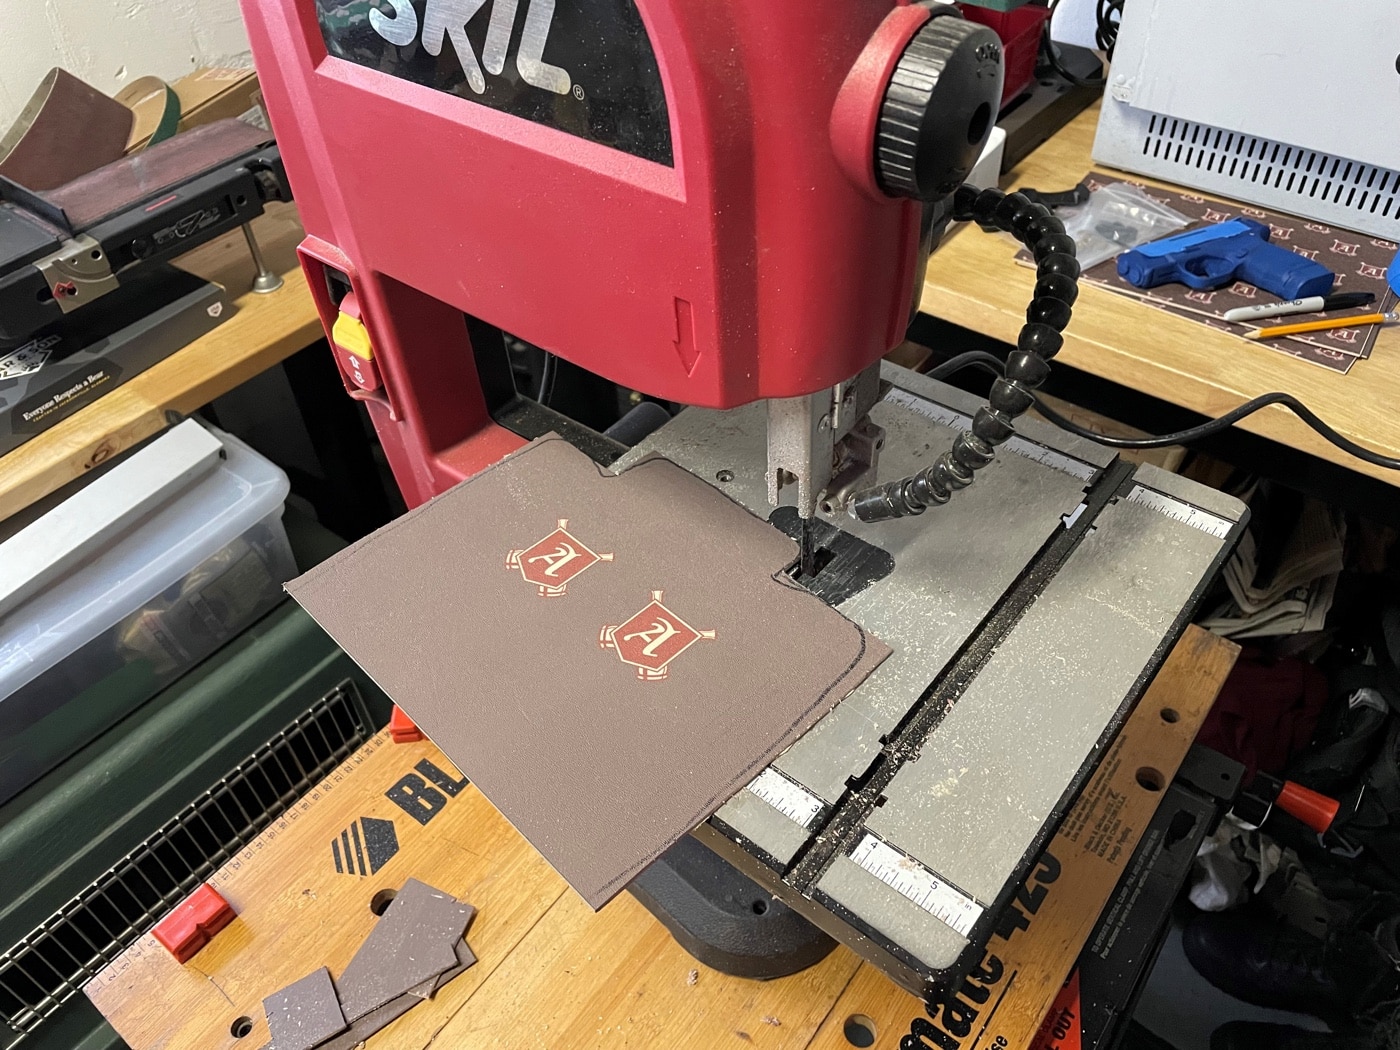 In this photo, the author is using a Skil brand band saw in his garage workshop to trim the Kydex to size. Before you stick the Kydex in the over, it is helpful to trim it to size for an easier fitting process. Be sure to leave a little extra space around your holster in case your measurements are not precise. This extra material will be easy to remove once the rig is molded around the handgun.